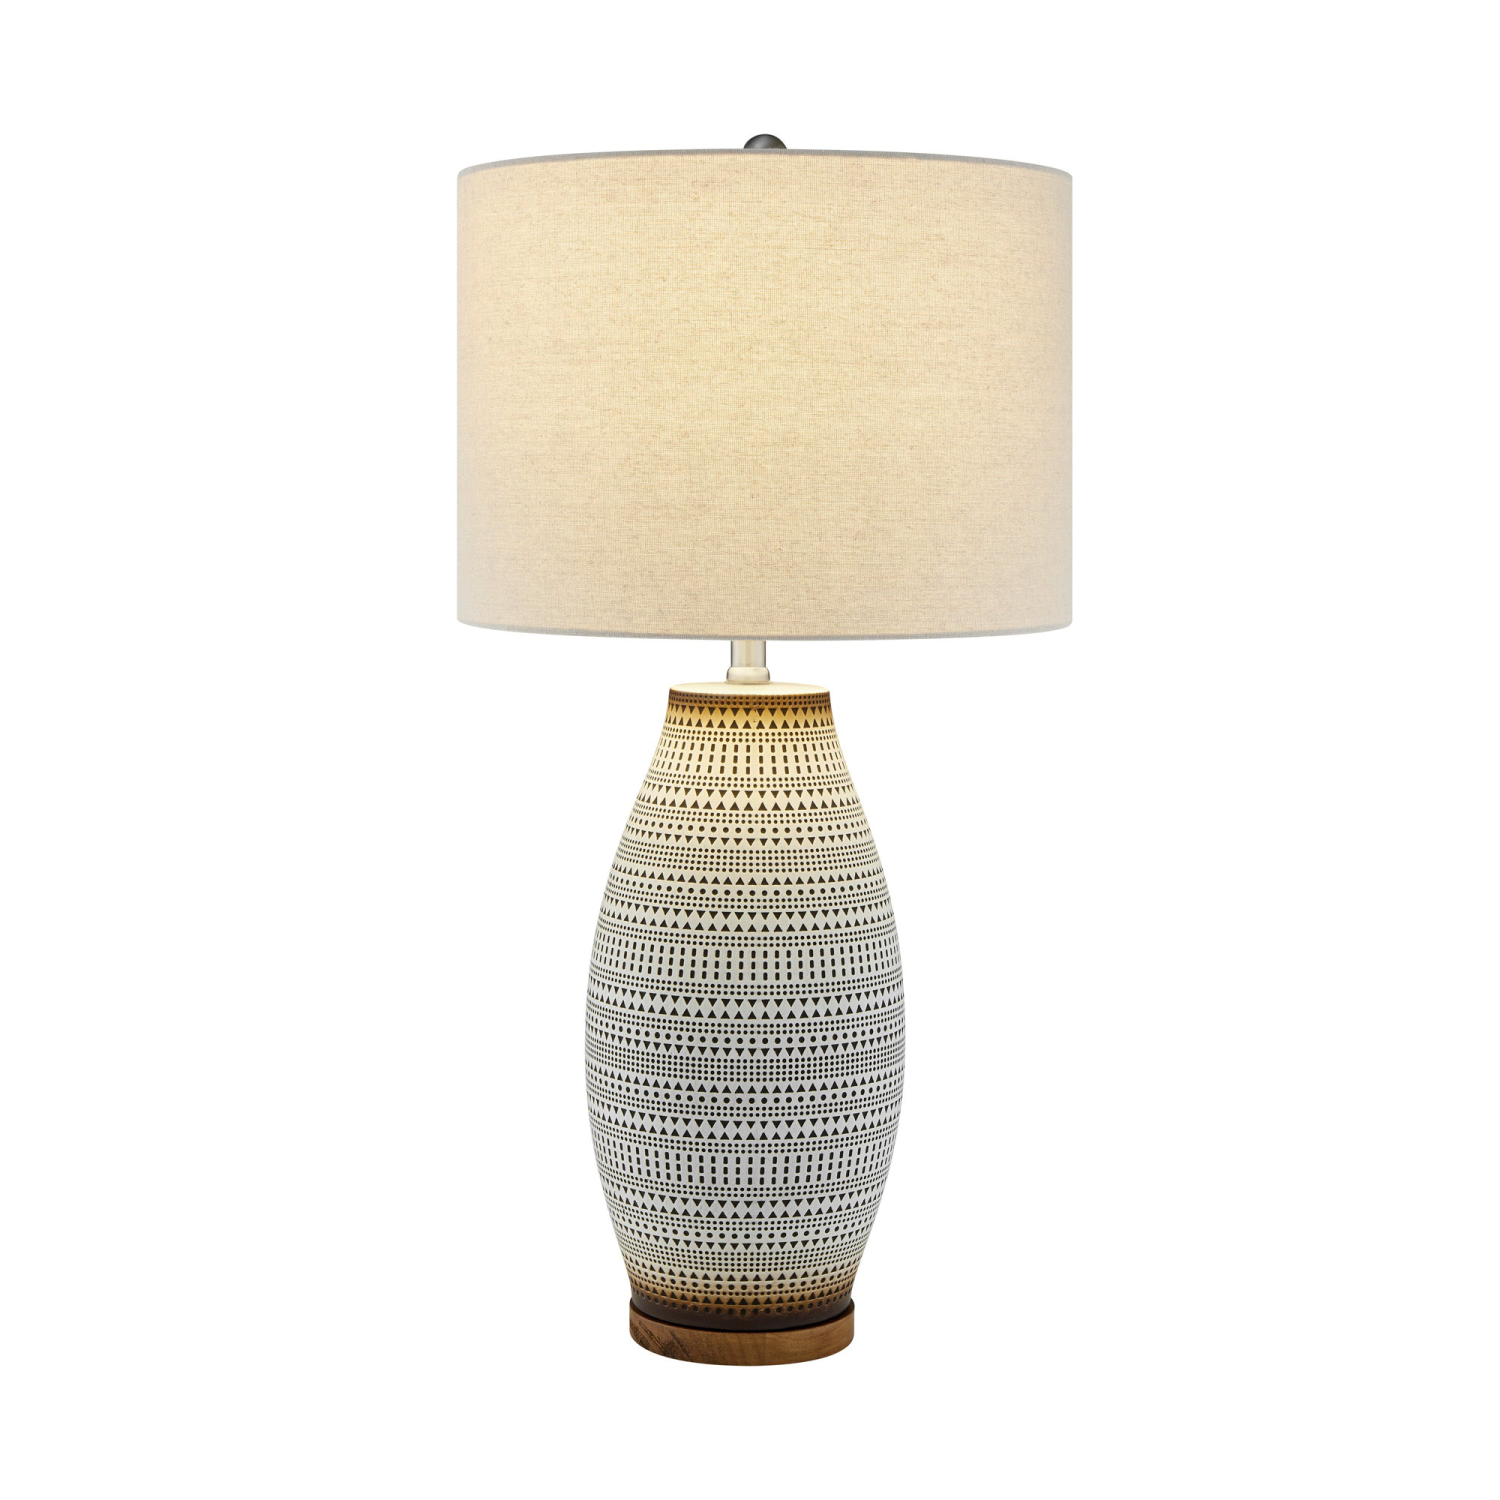 Monaco Table Lamp Picture with White Background